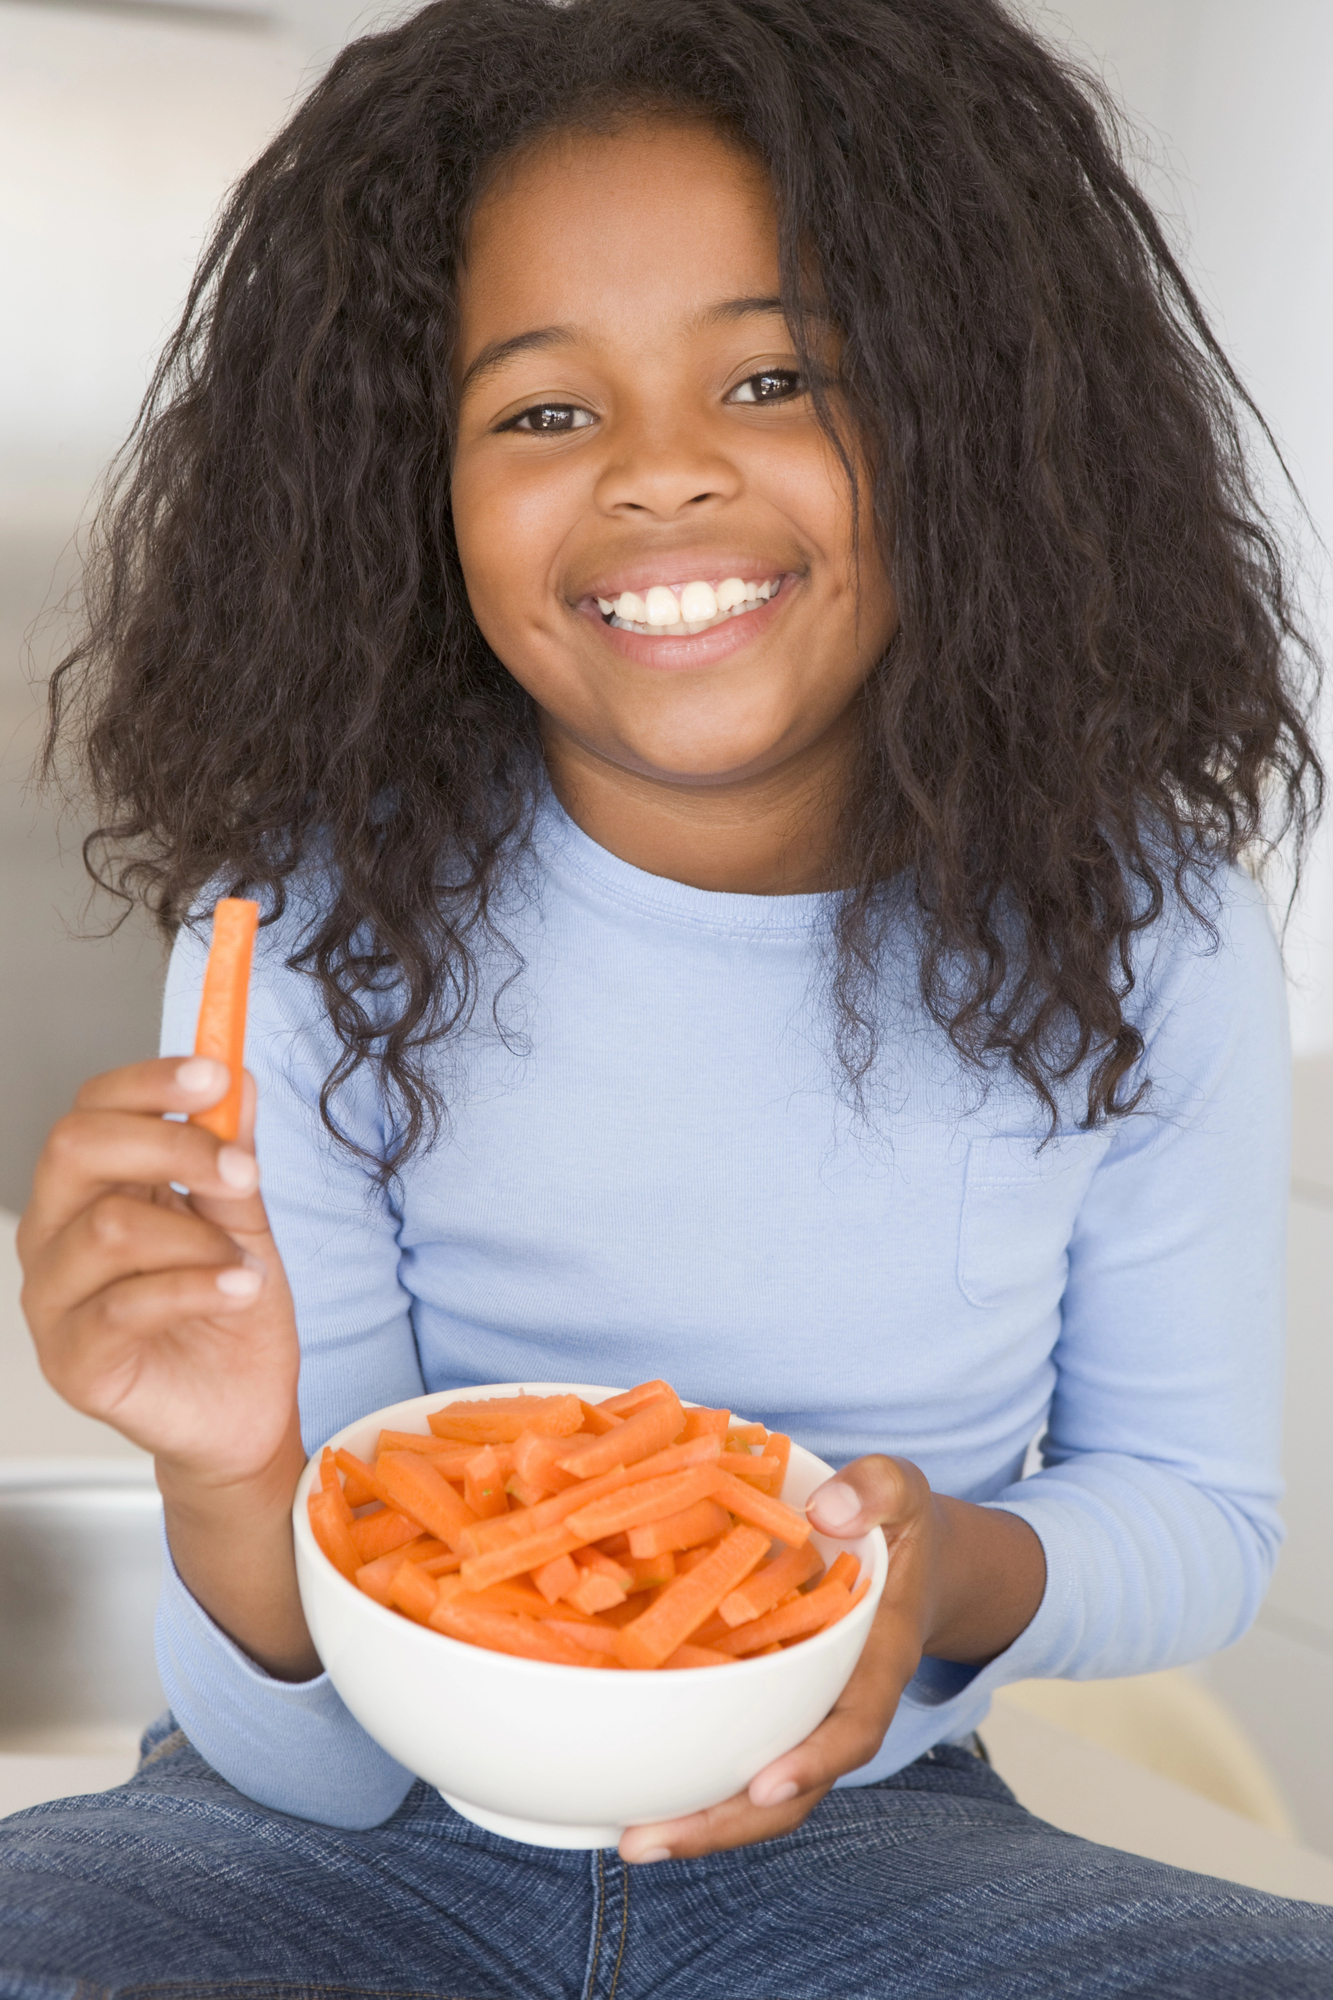 African american girl showing health eating habits for an article on fun cooking activities for kids.